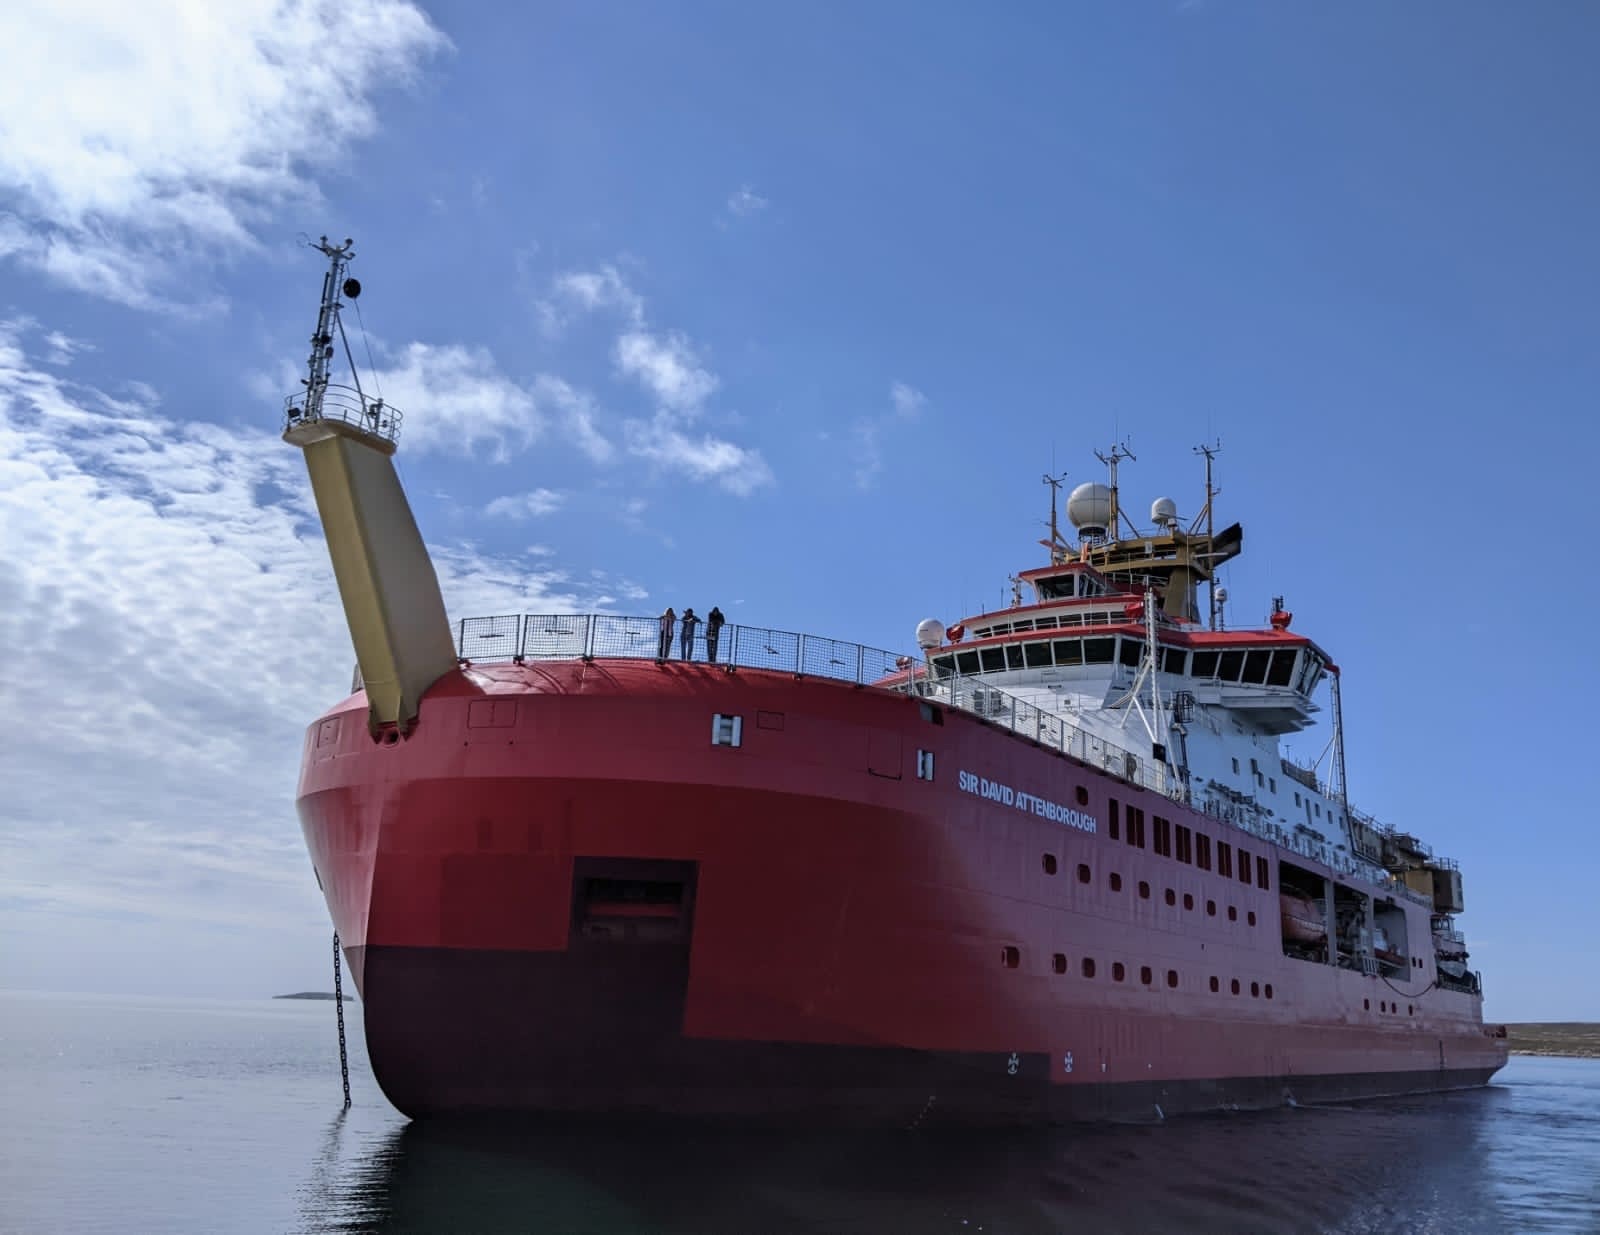 The RRS Sir David Attenborough polar research ship in a body of water in Antarctica